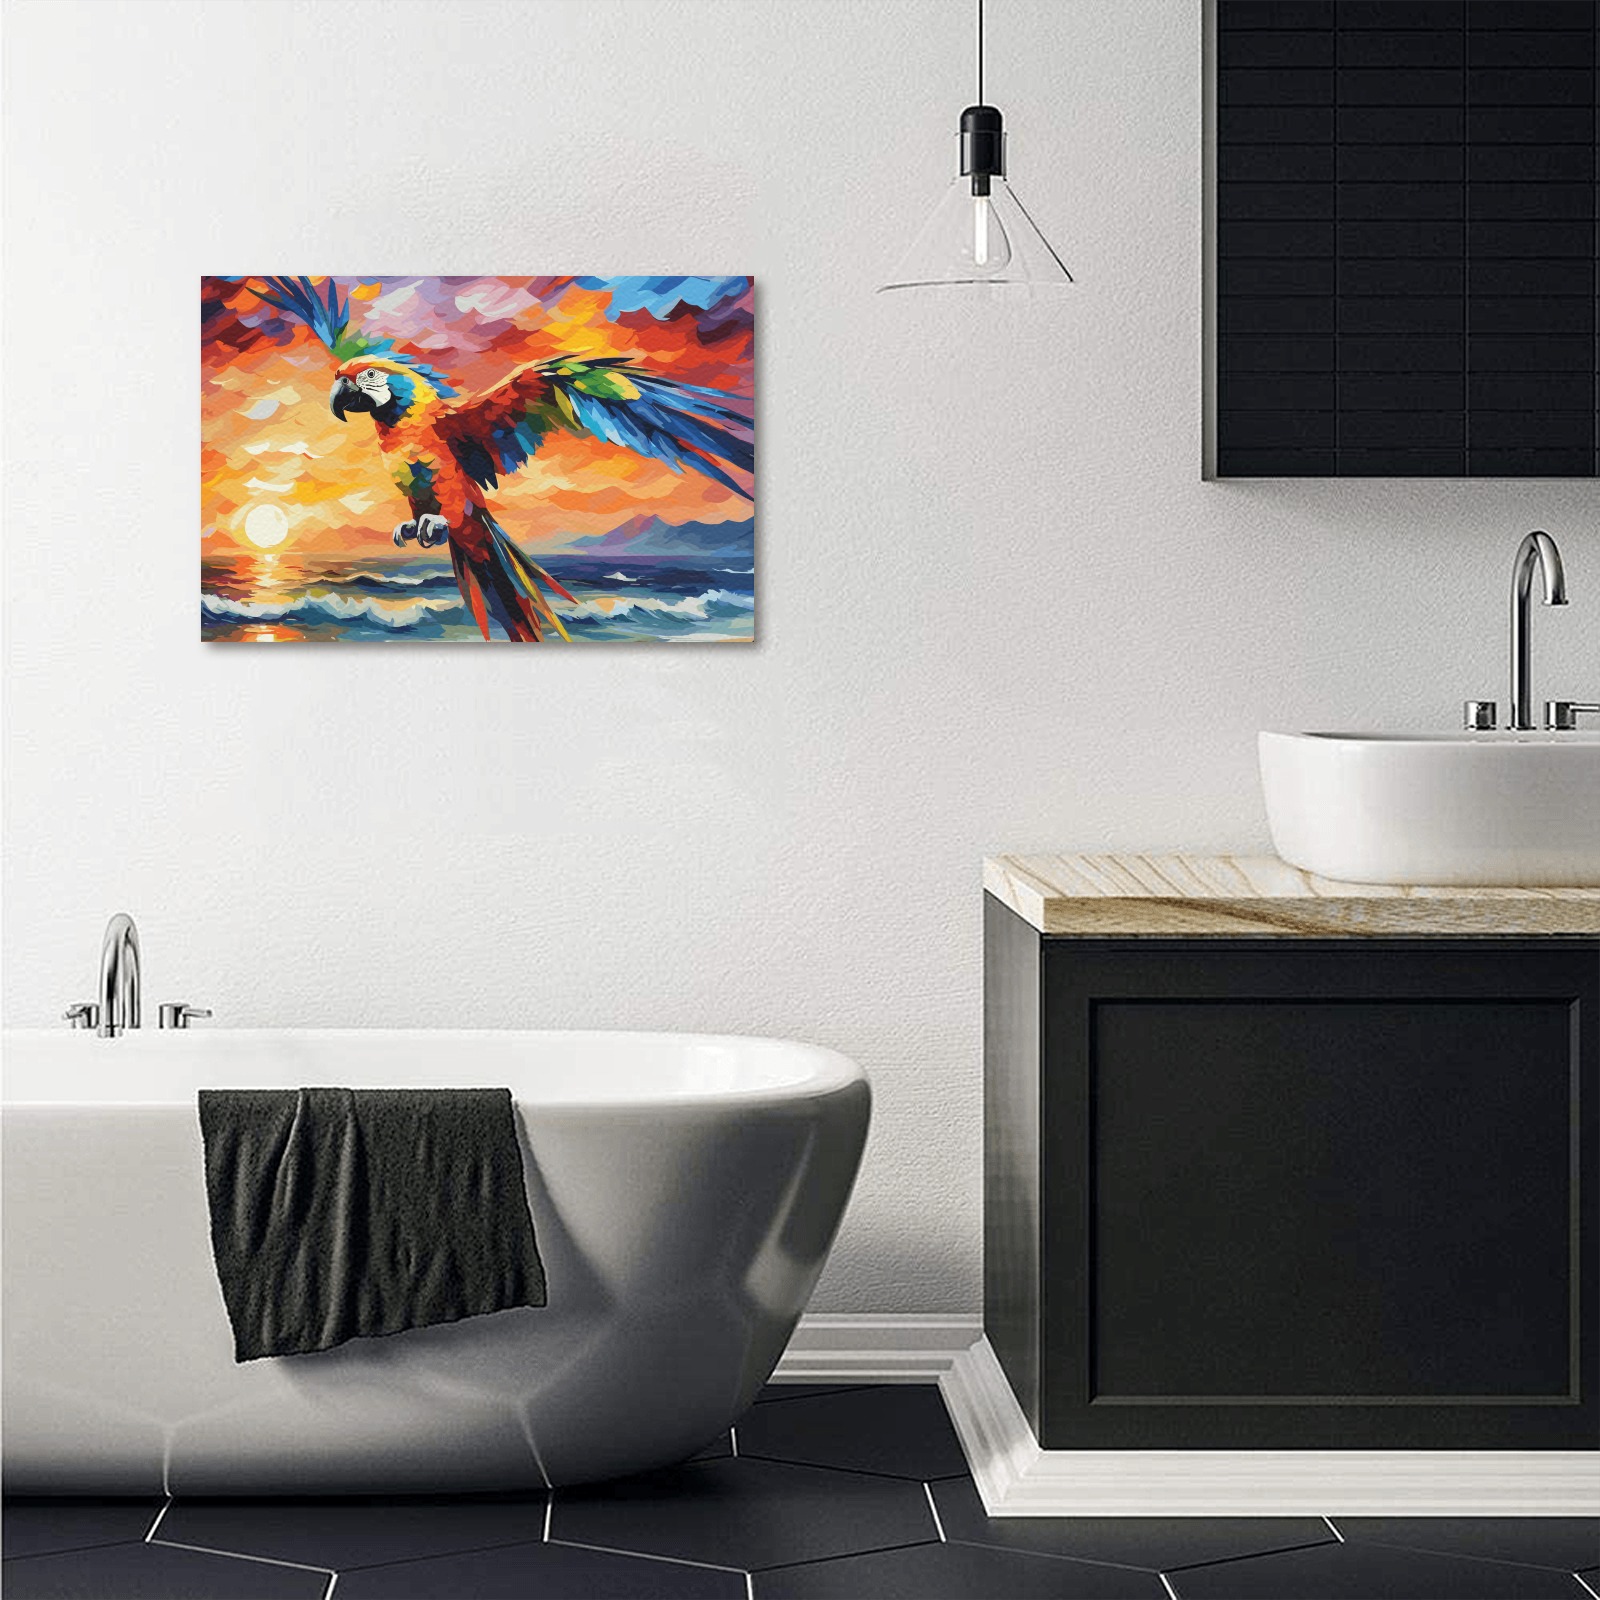 A colorful parrot by the sea at ocean sunset. Upgraded Canvas Print 18"x12"